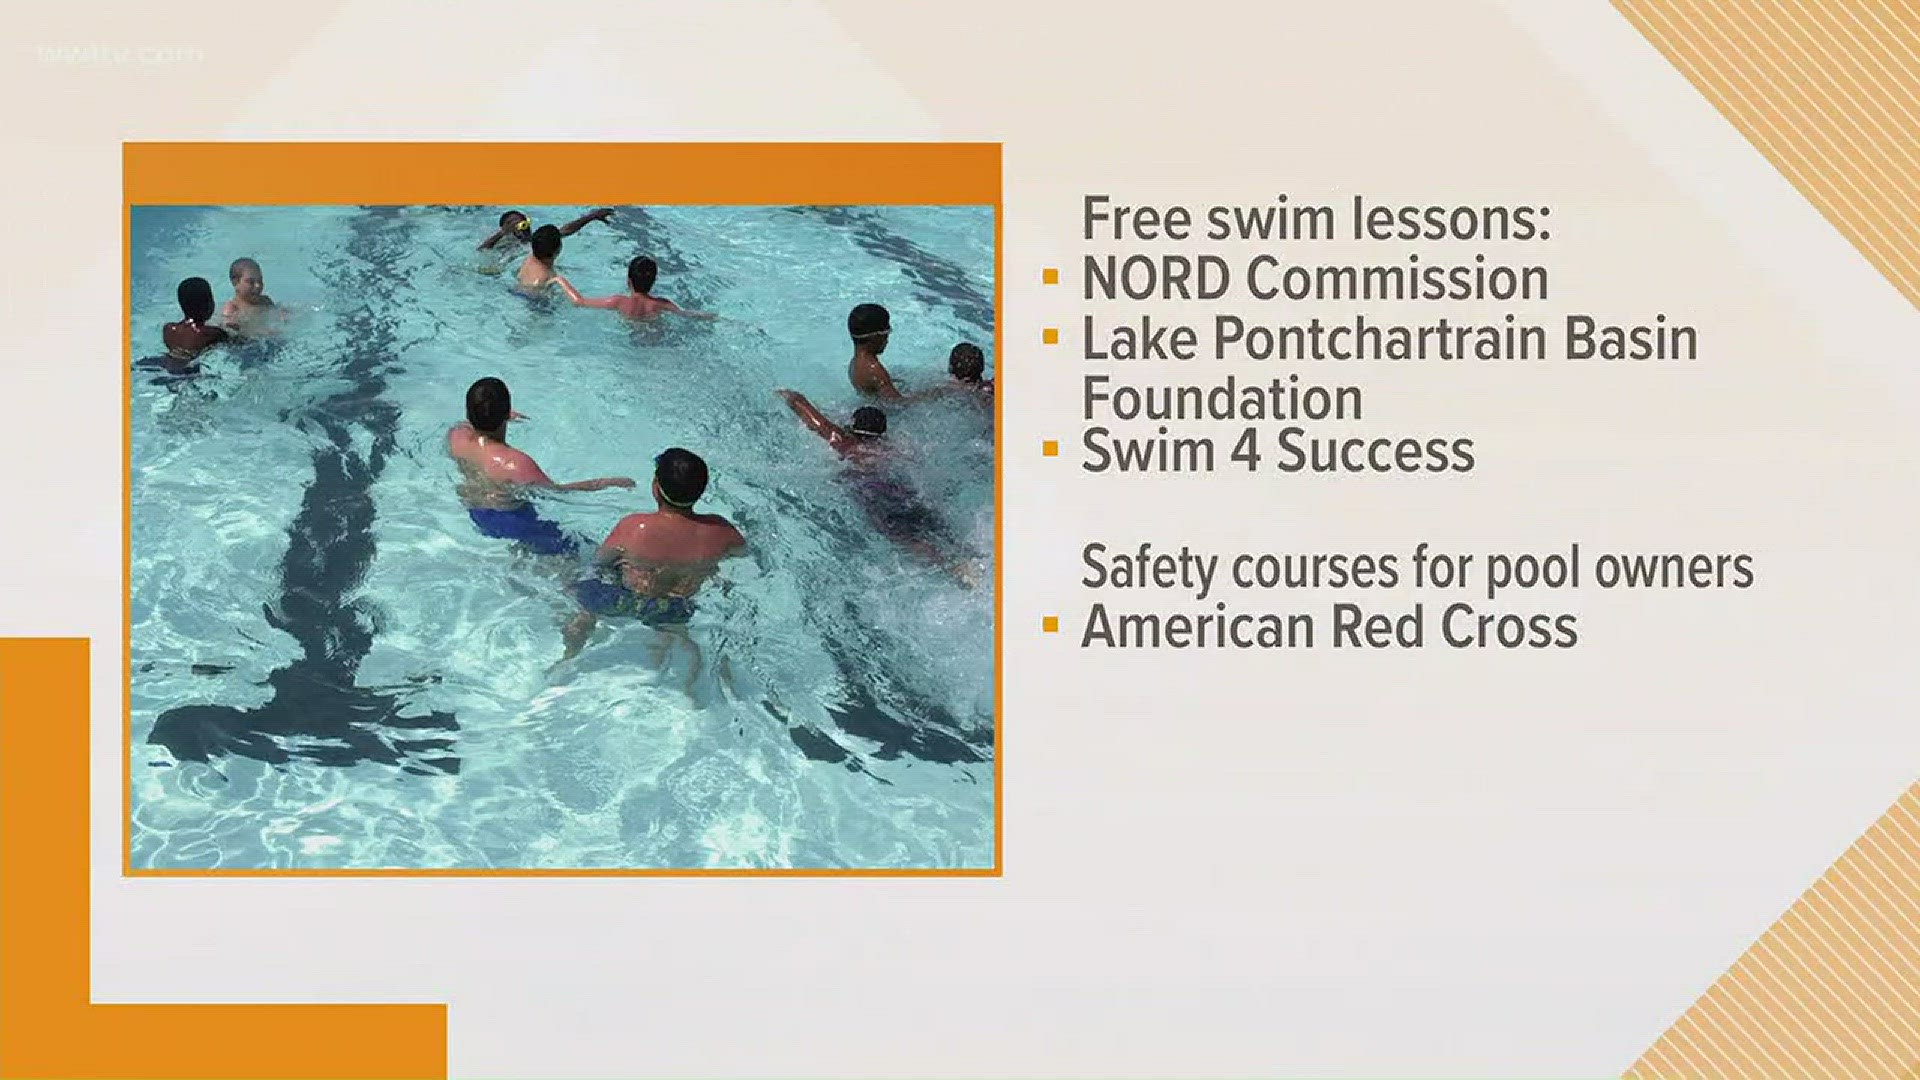 Free swimming lessons available as summer approaches